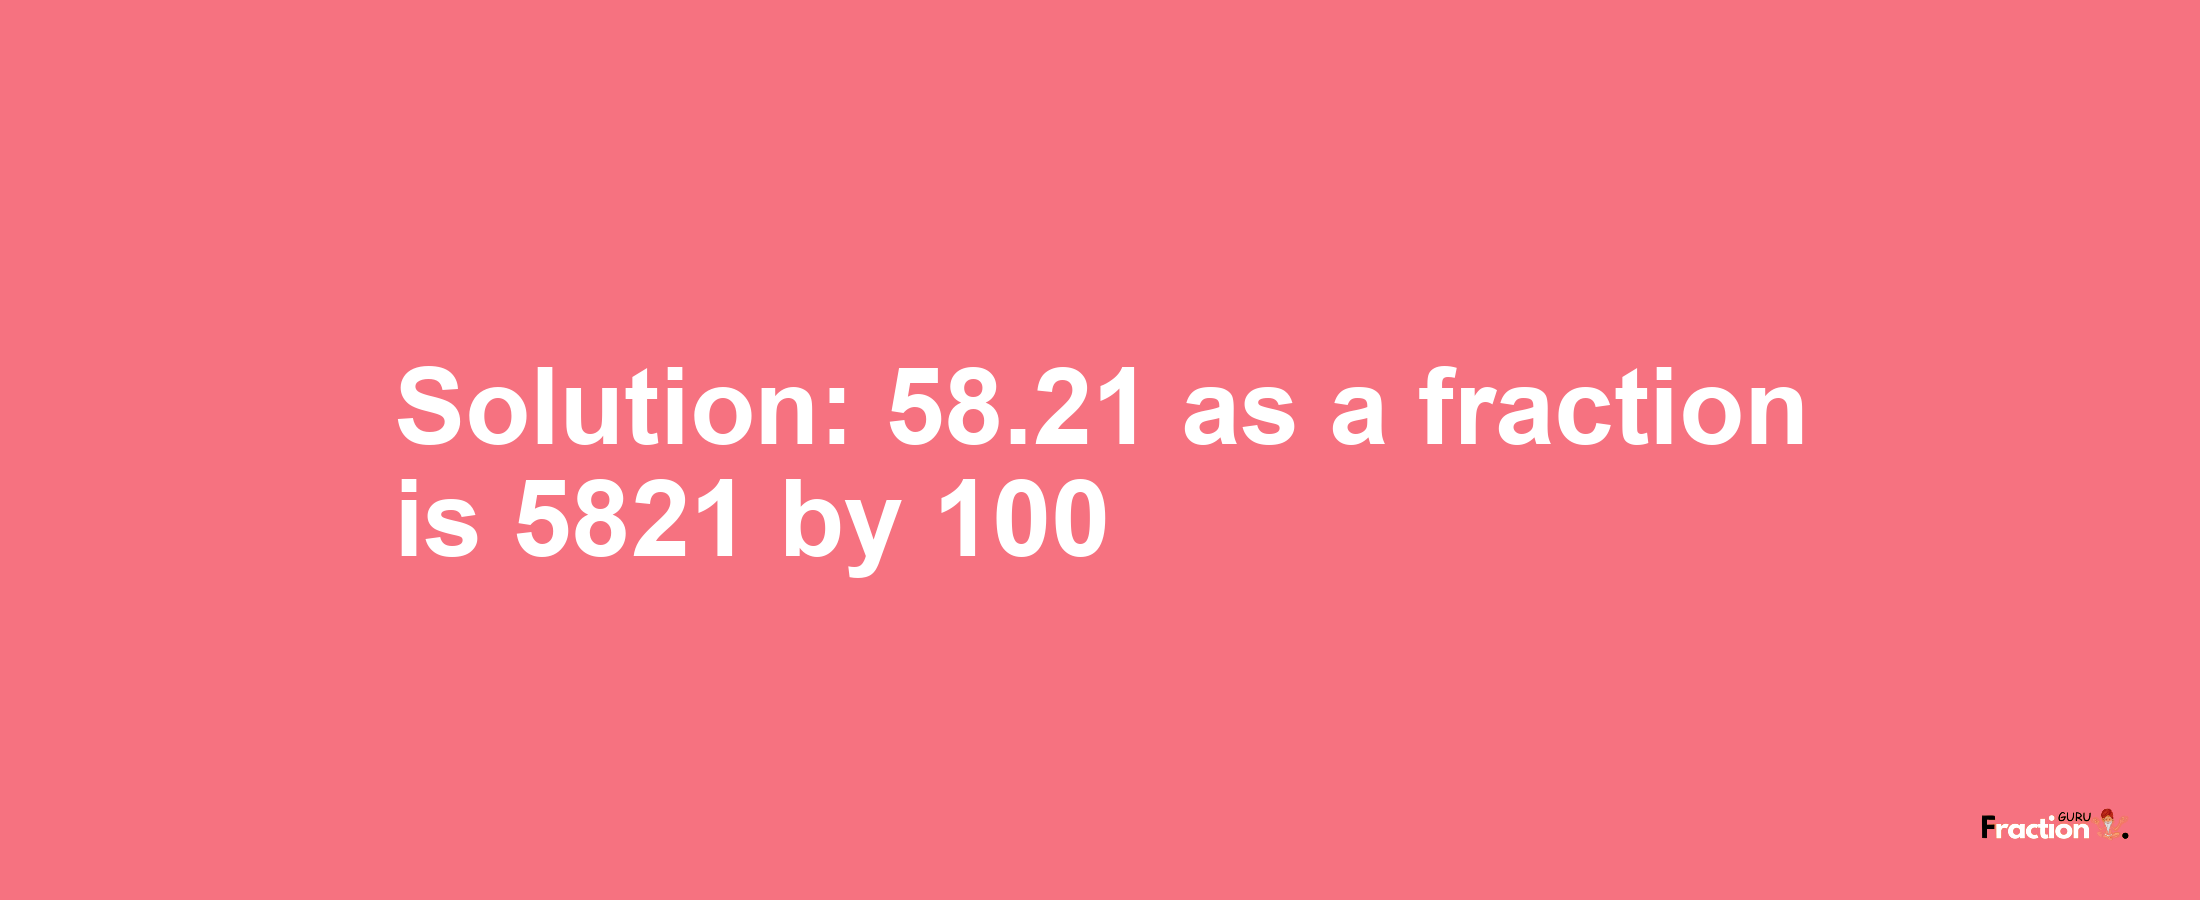 Solution:58.21 as a fraction is 5821/100